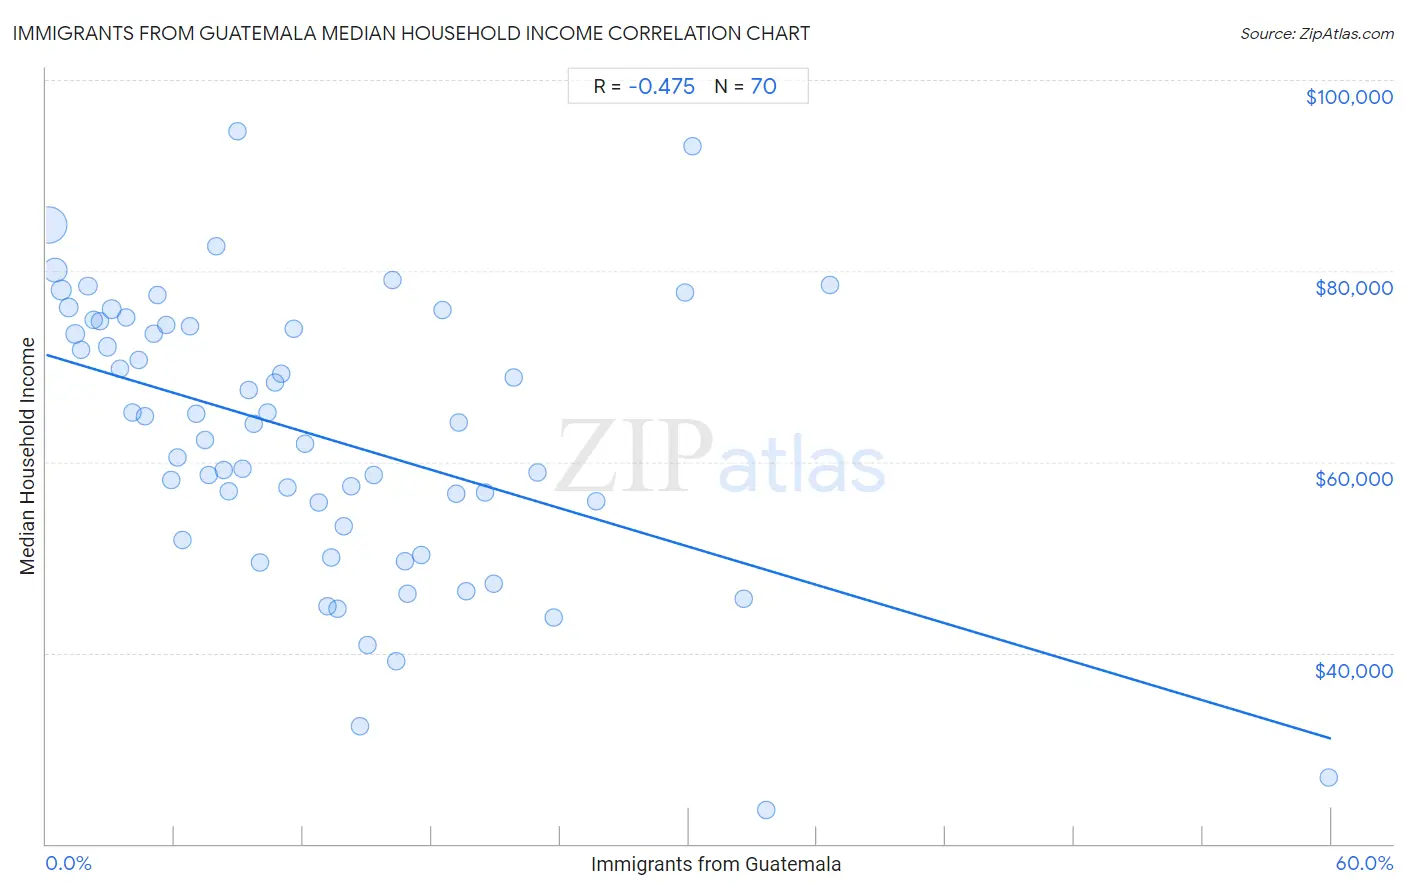 Immigrants from Guatemala Median Household Income